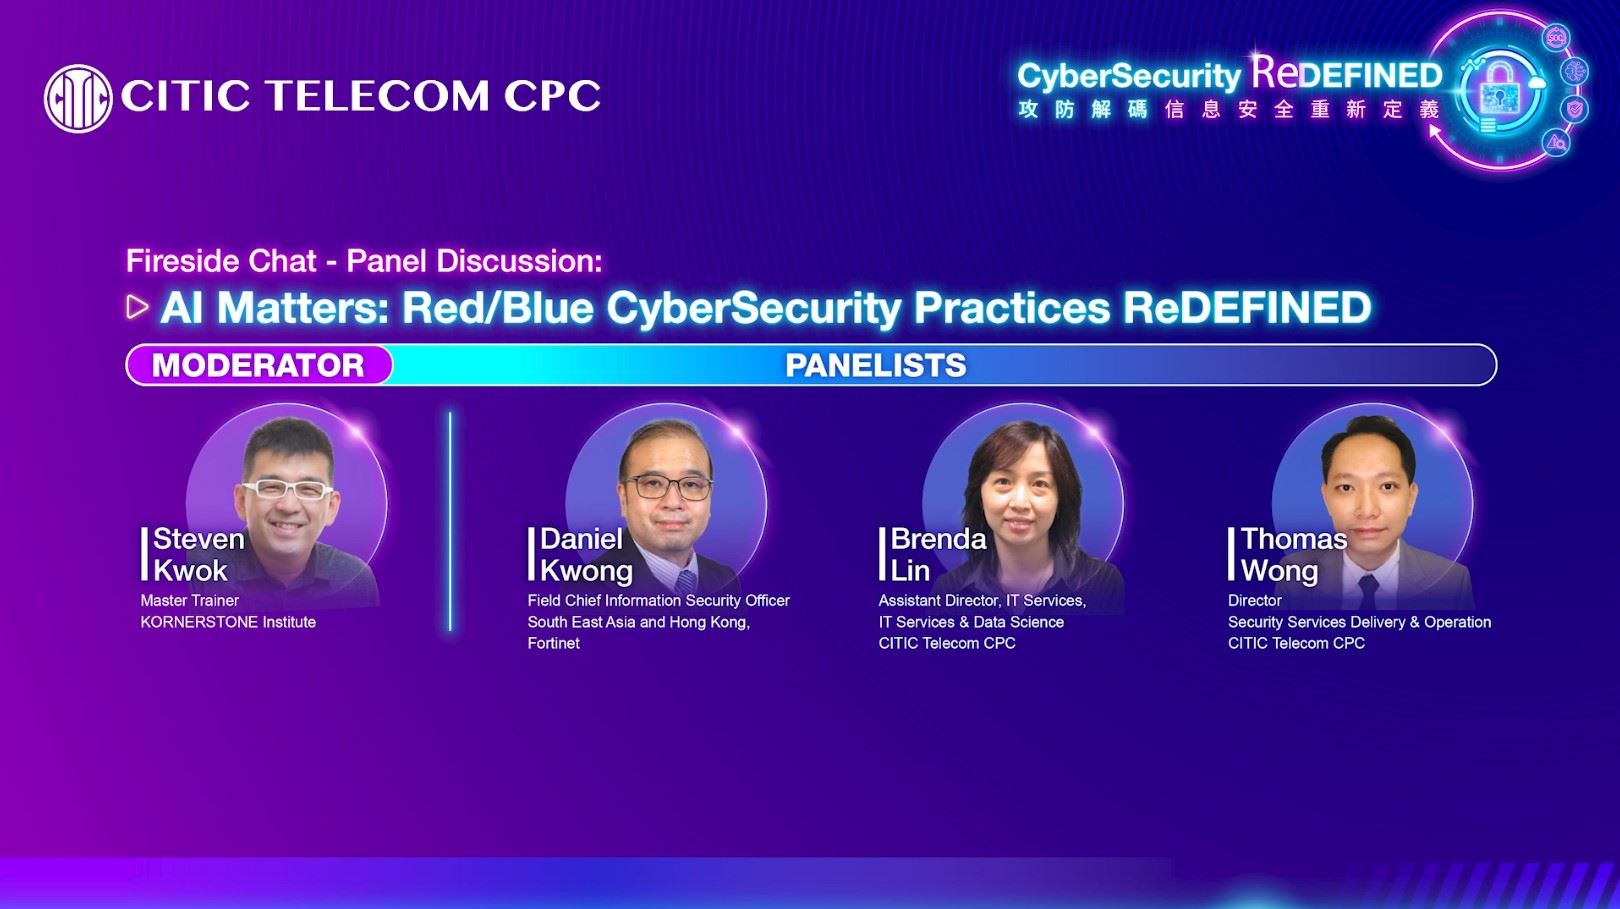 【CyberSecurity ReDEFINED 信息安全大会 | 活动精华】Fireside Chat: Panel 1 Discussion